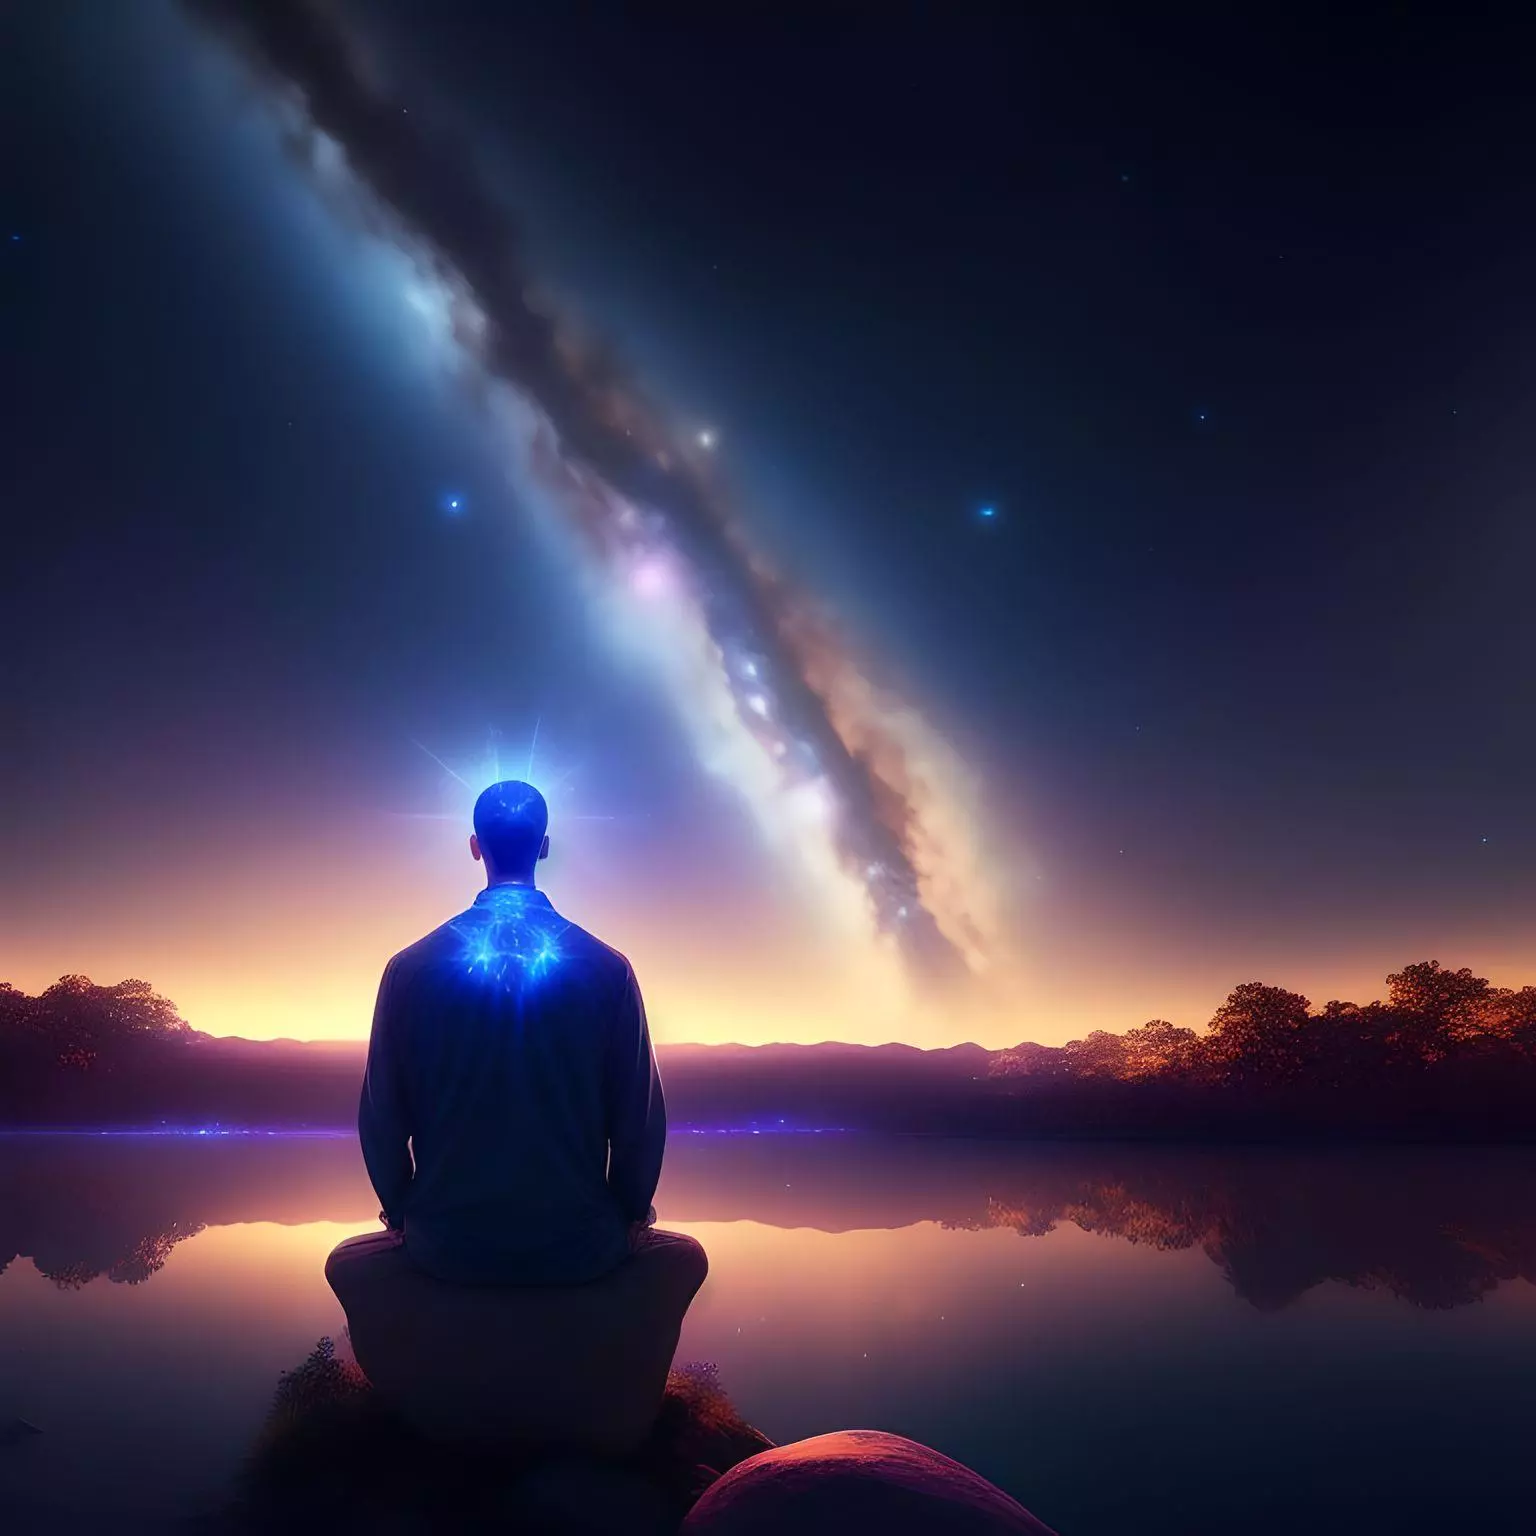 ethereal person meditating in front of a body of water with a moonlit sky